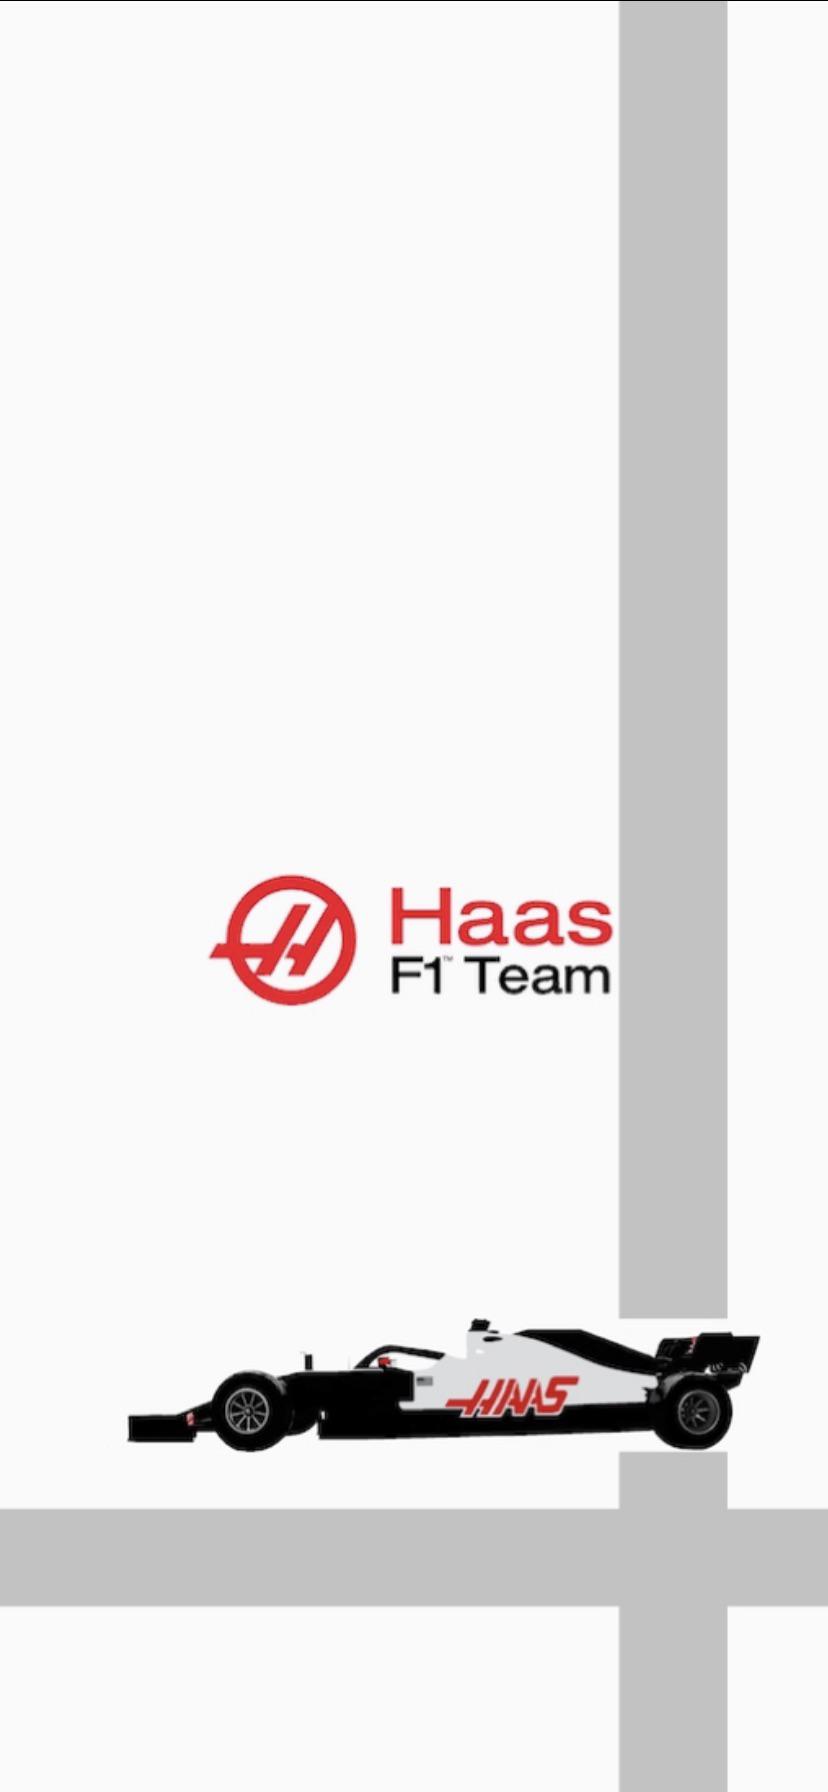 Here's a HAAS F1 Mobile Wallpaper that i made.: haasf1team